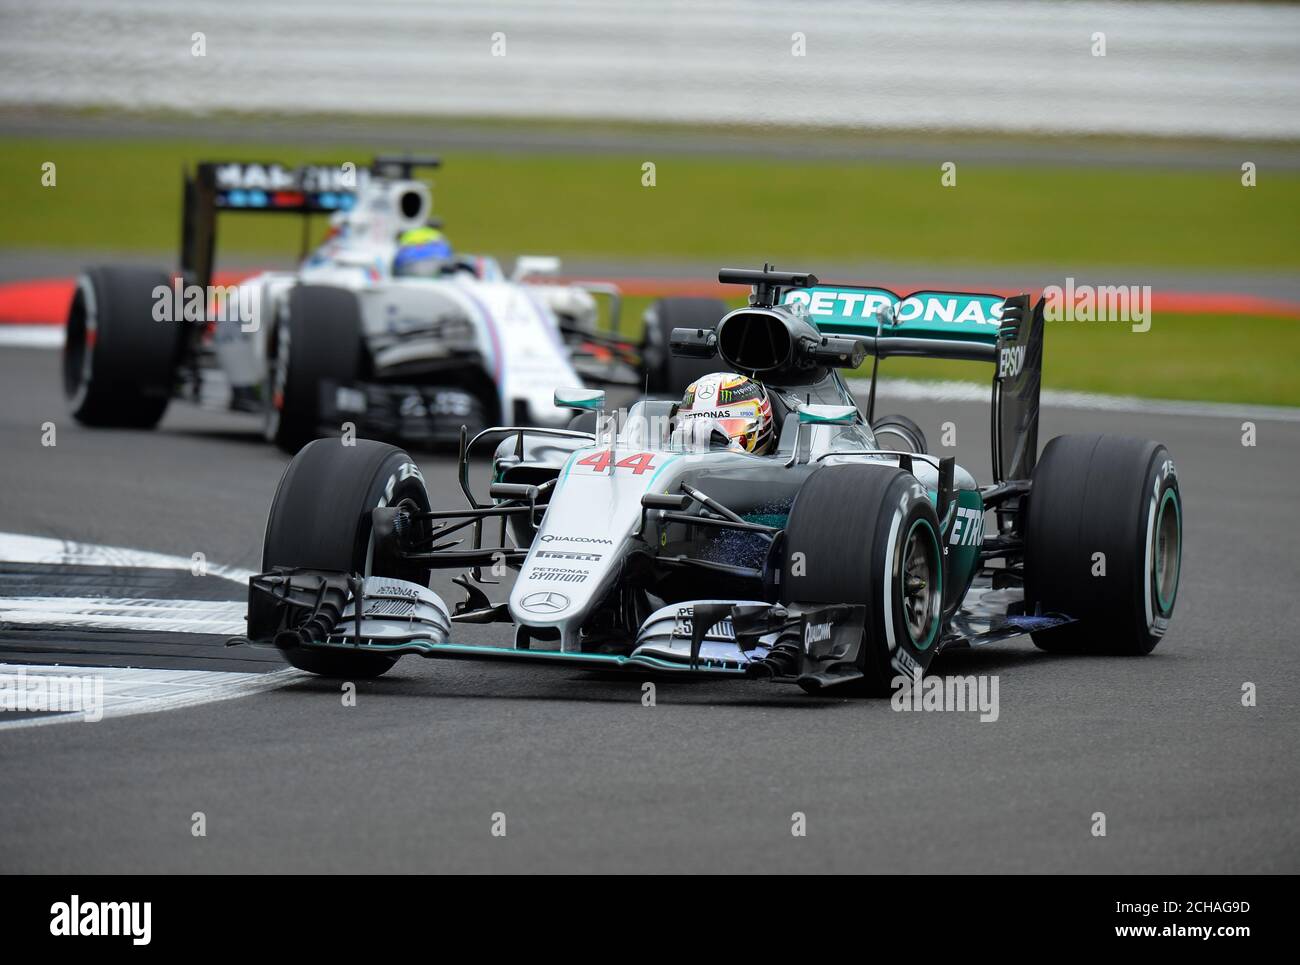 Mercedes' Lewis Hamilton during Practice Day for the 2016 British Grand Prix at Silverstone Circuit, Towcester. Stock Photo